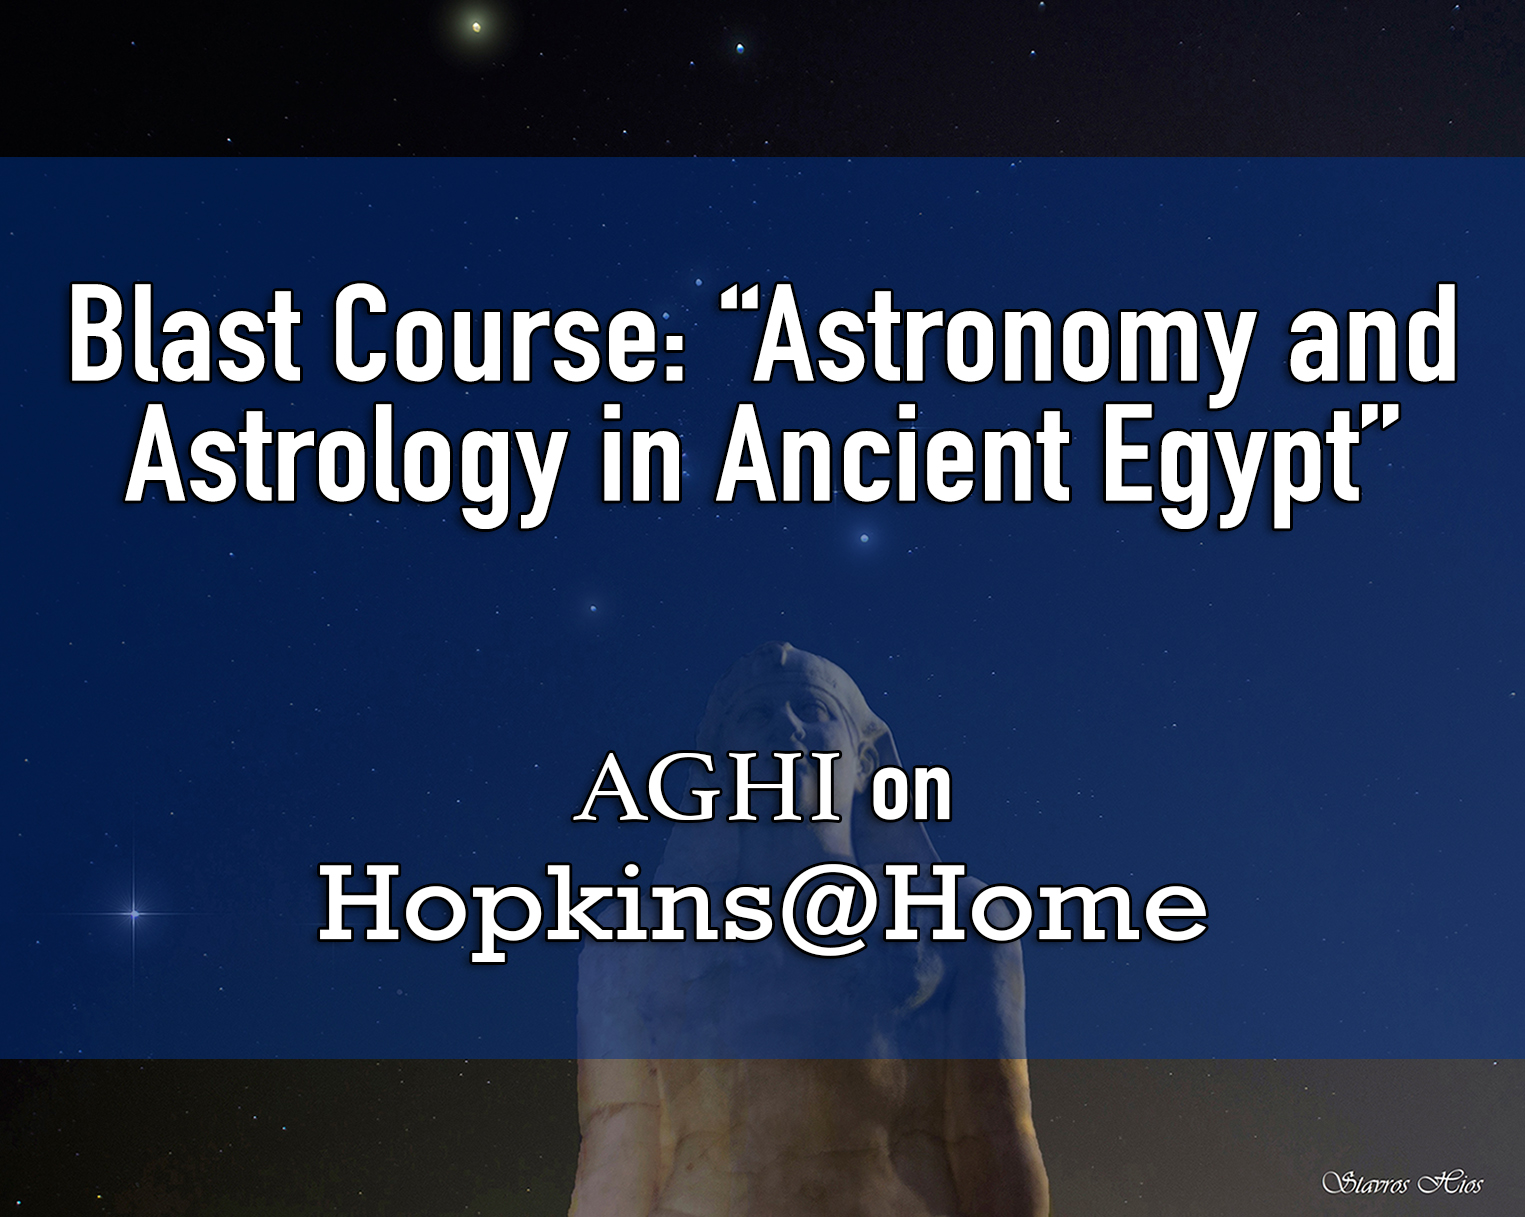 Blast Course: “Astronomy and Astrology in Ancient Egypt”